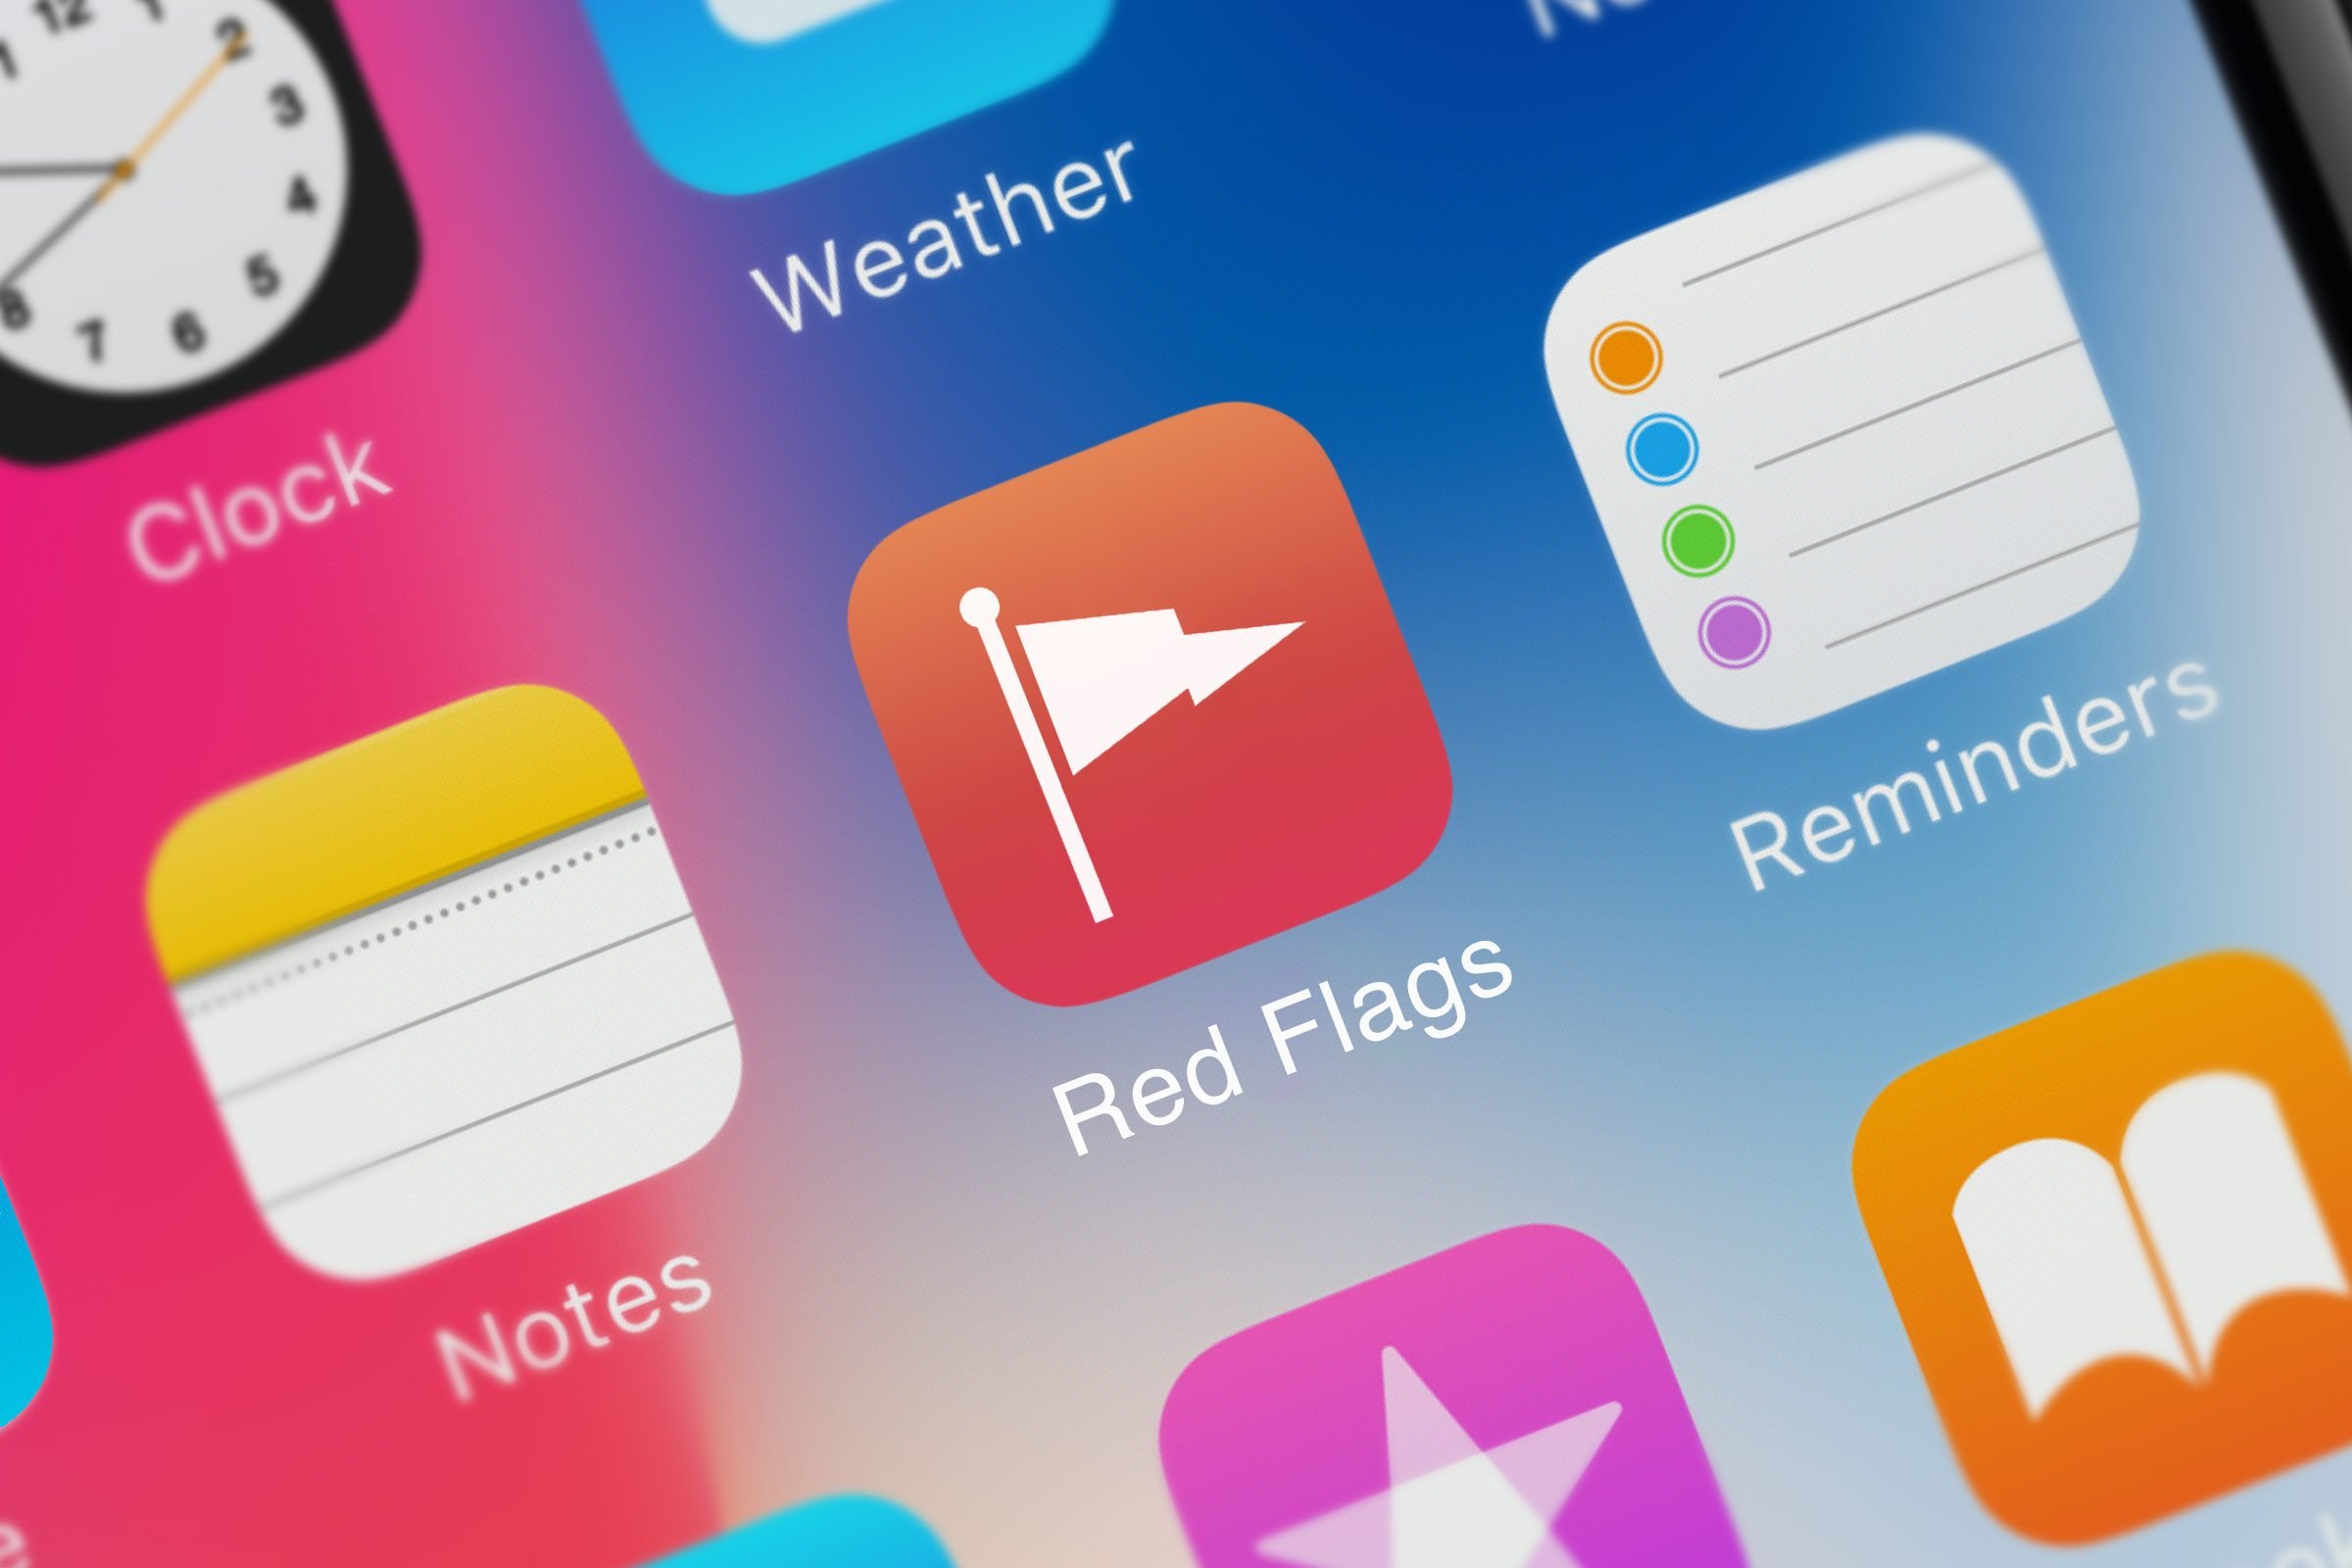 5 red flags you shouldn't trust an app | reader's digest